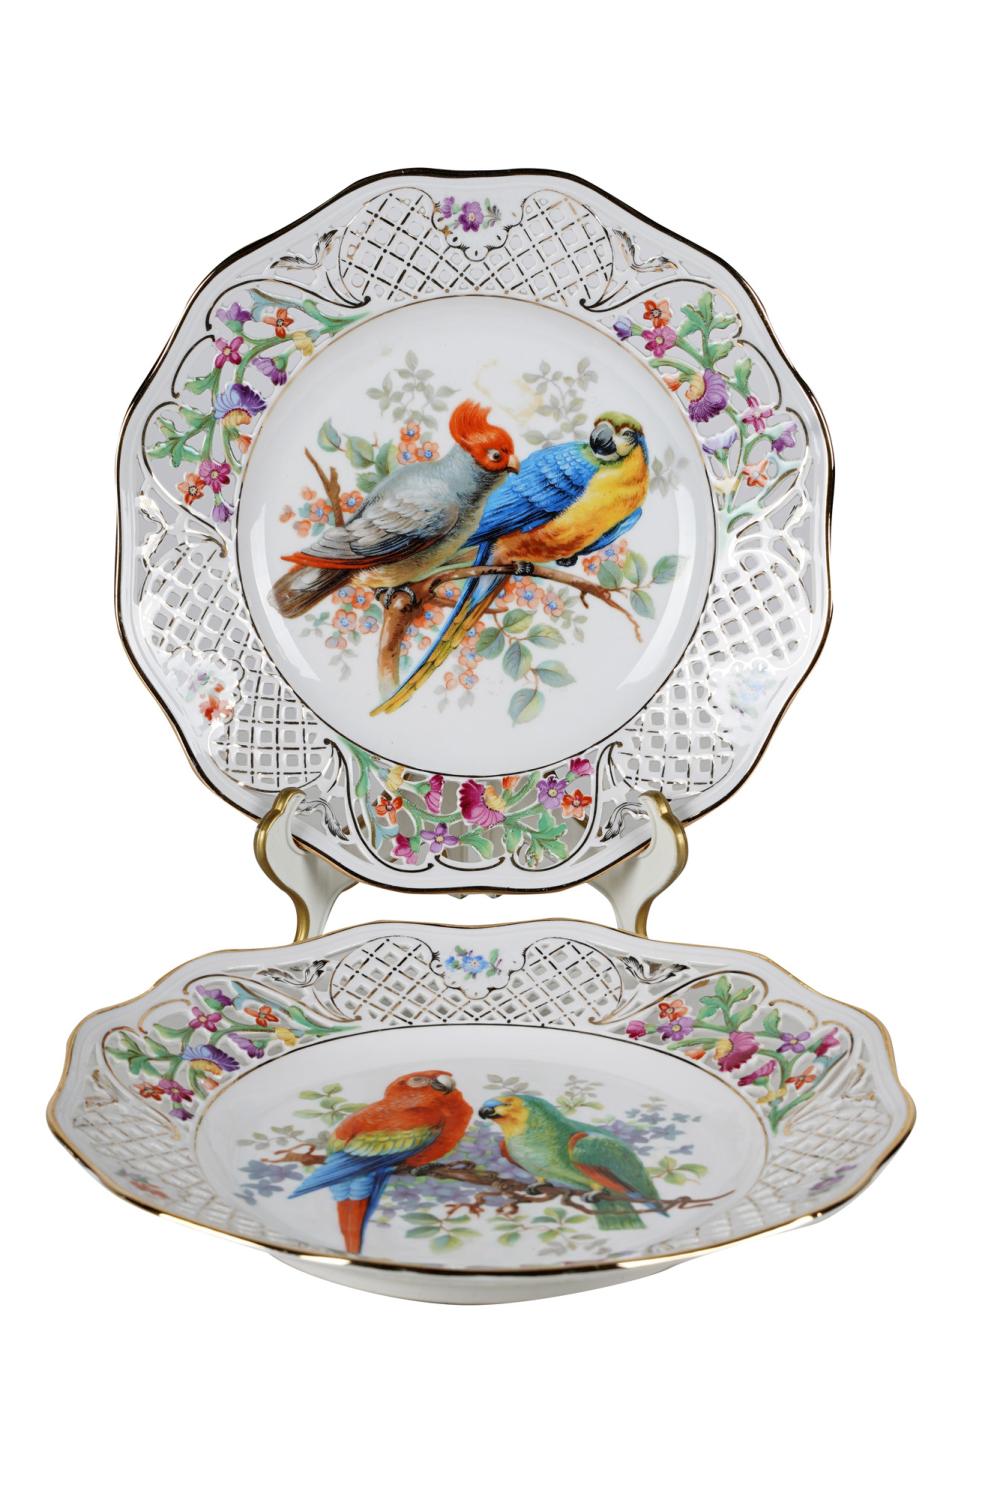 PAIR OF BAVARIAN PORCELAIN RETICULATED